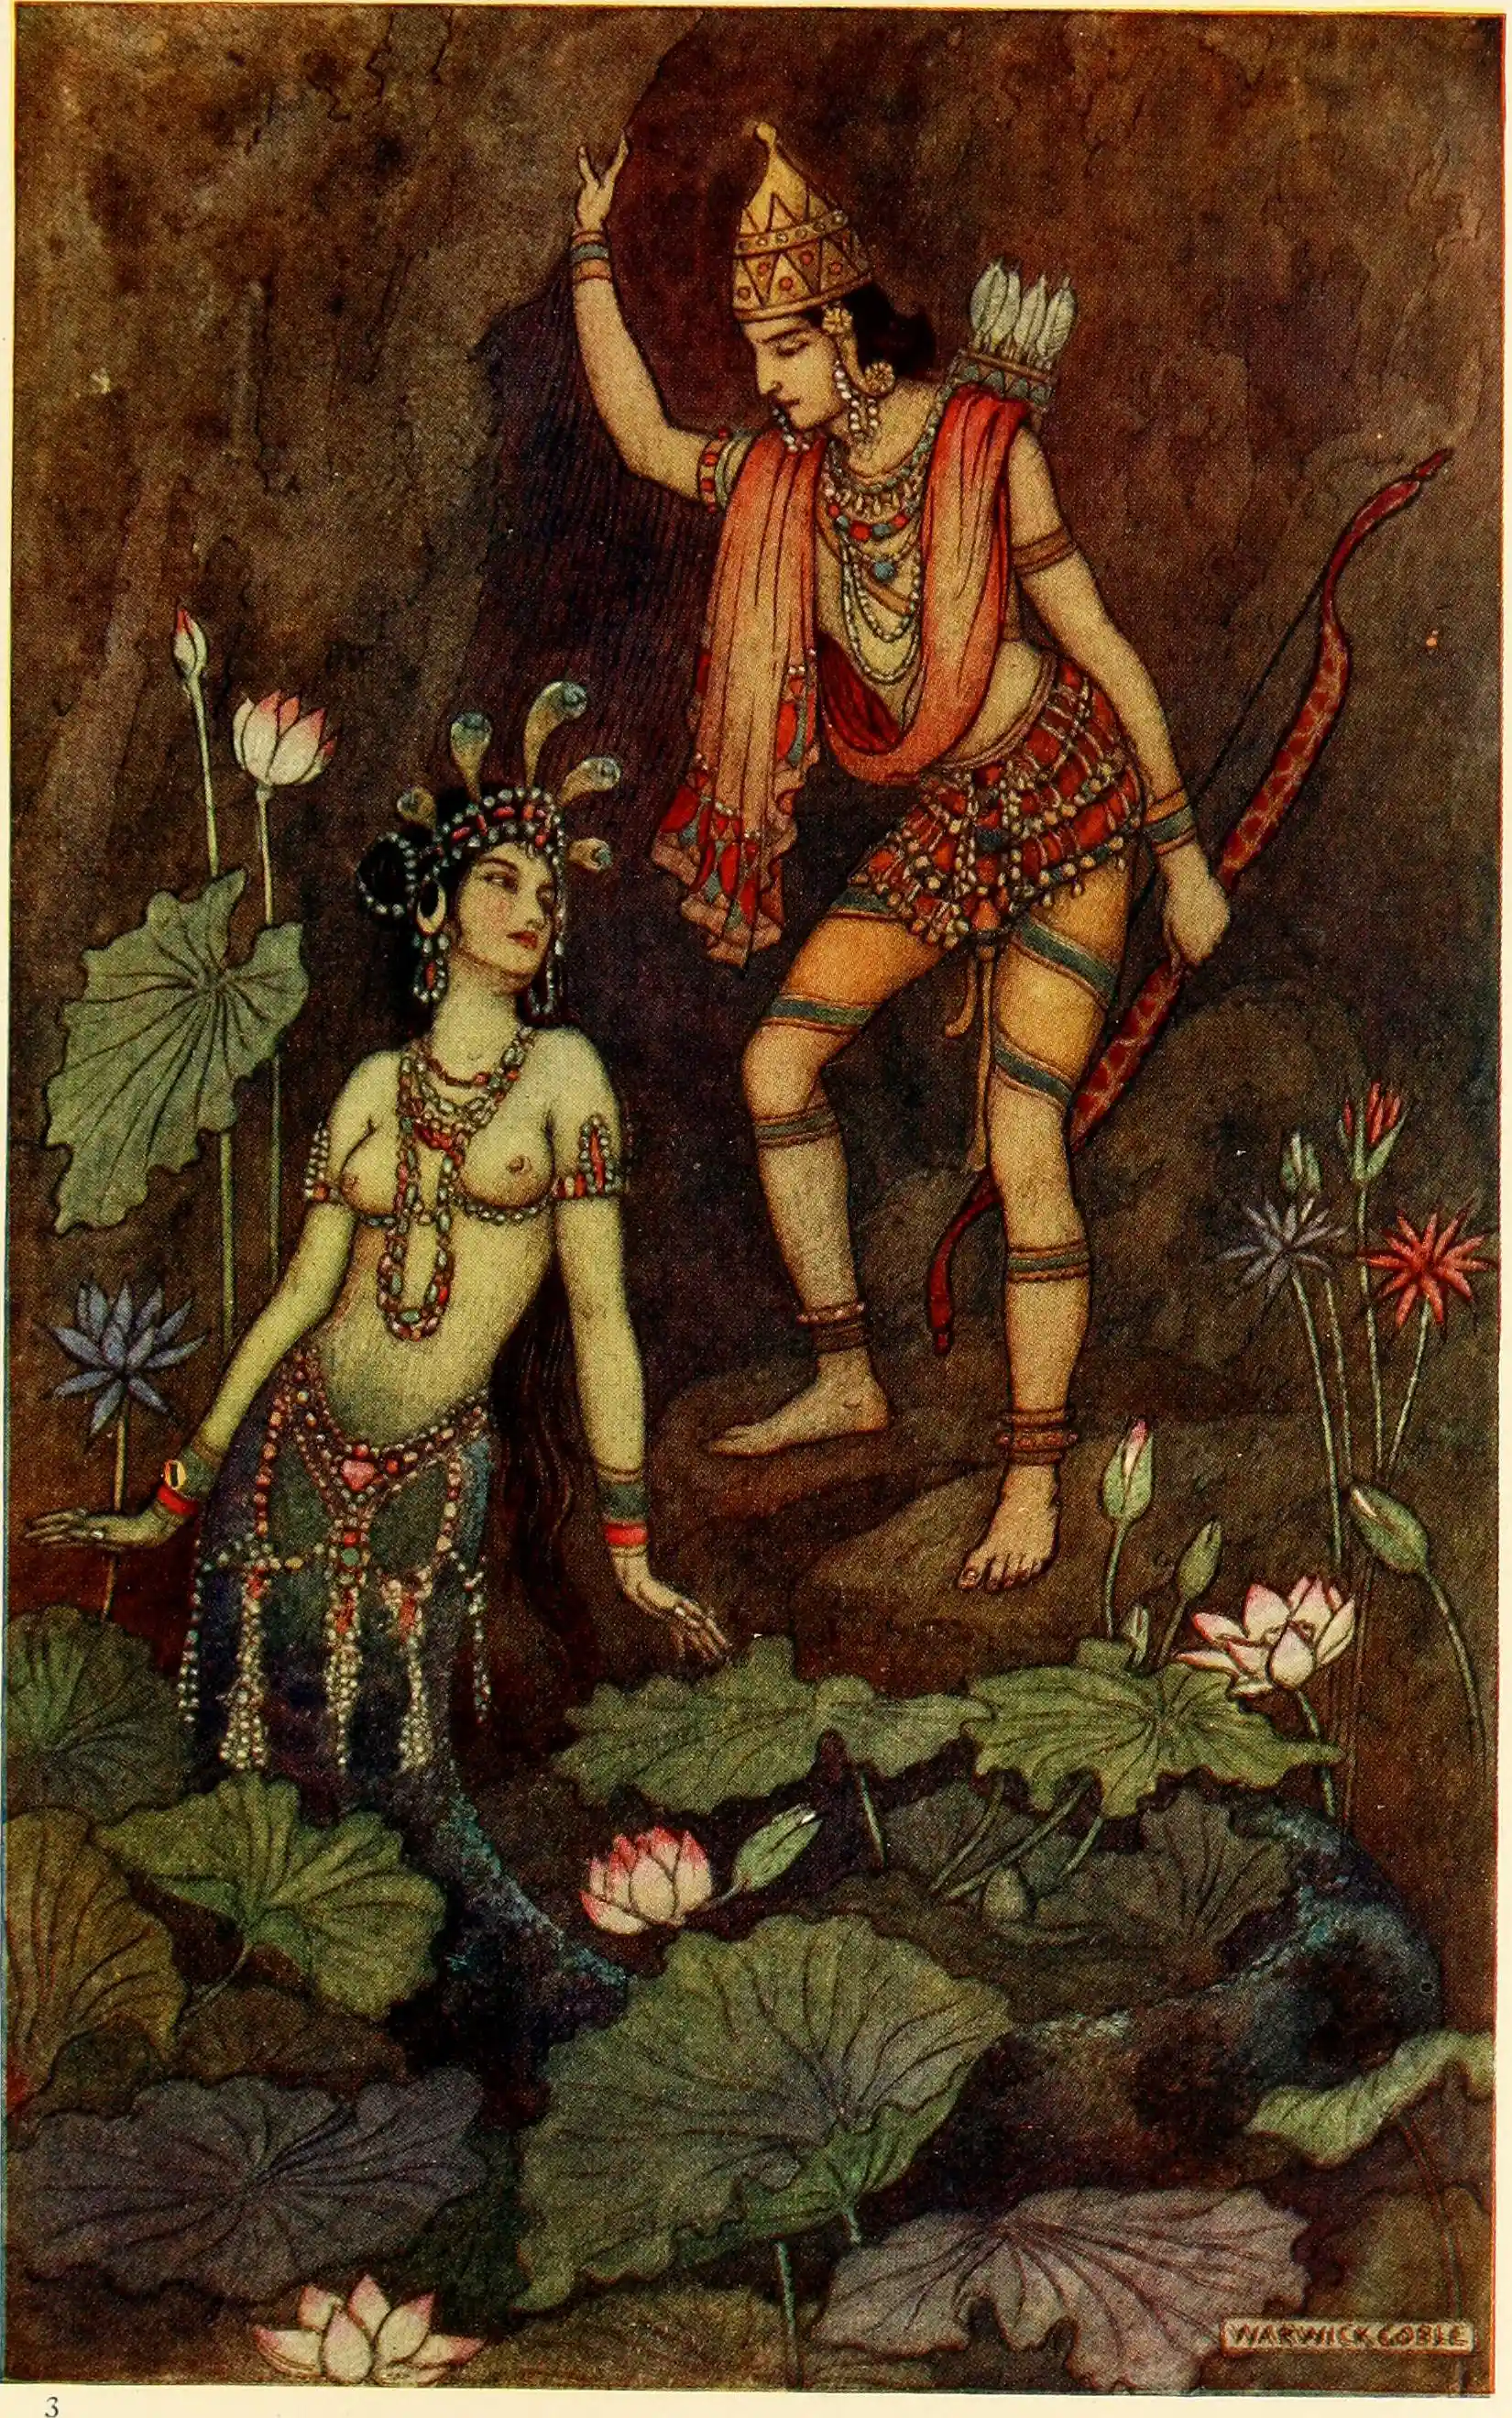 Arjuna with the river nymph, Ulupi; Image Source: Wikimedia Commons